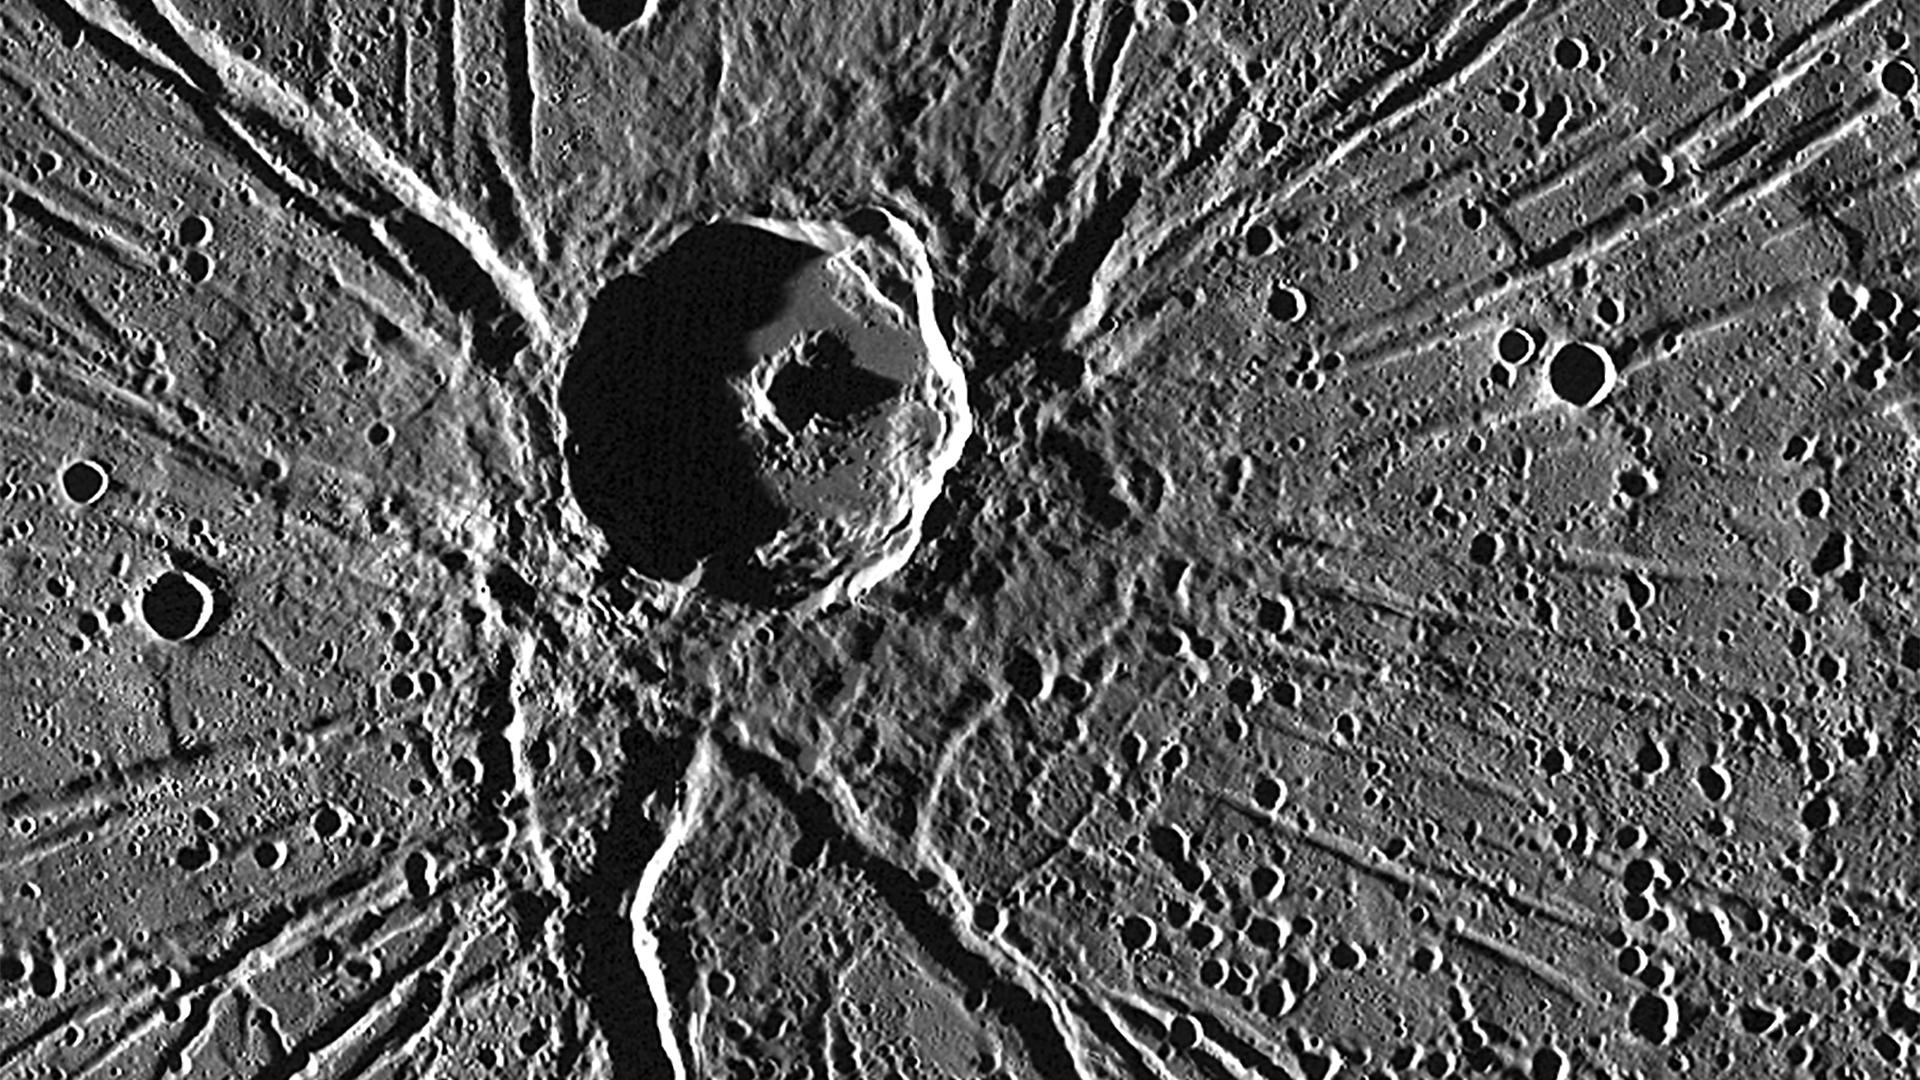 One of the most captivating views acquired during MESSENGER's first Mercury flyby was of the crater Apollodorus surrounded by the radiating troughs of Pantheon Fossae.